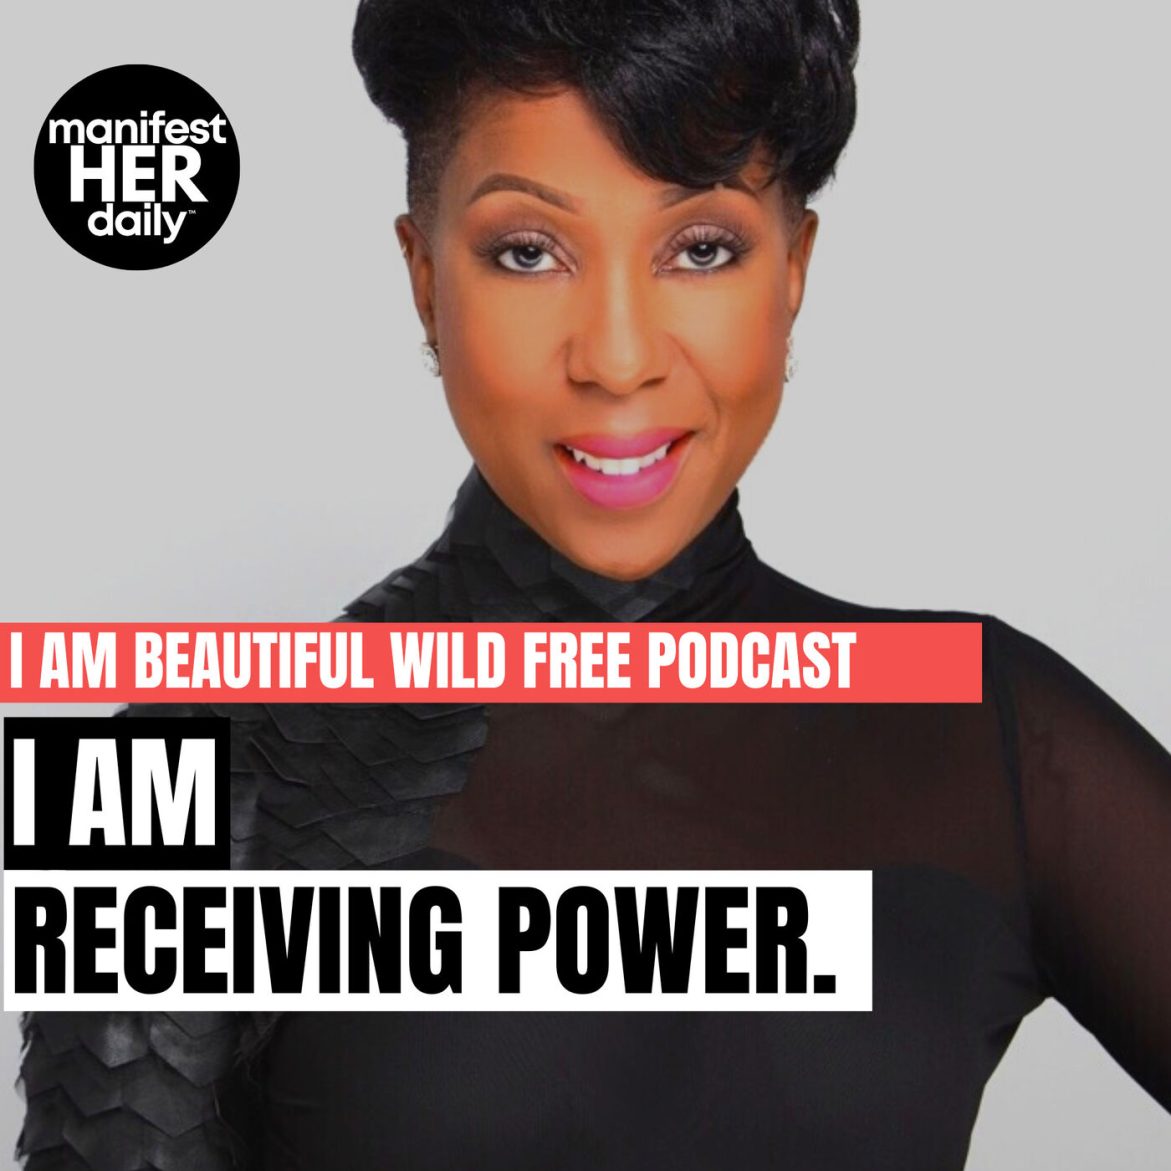 Black Podcasting - I AM RECEIVING POWER: A Guided Meditation Podcast with Affirmations from the Bible by BWFwoman x manifestHER Daily